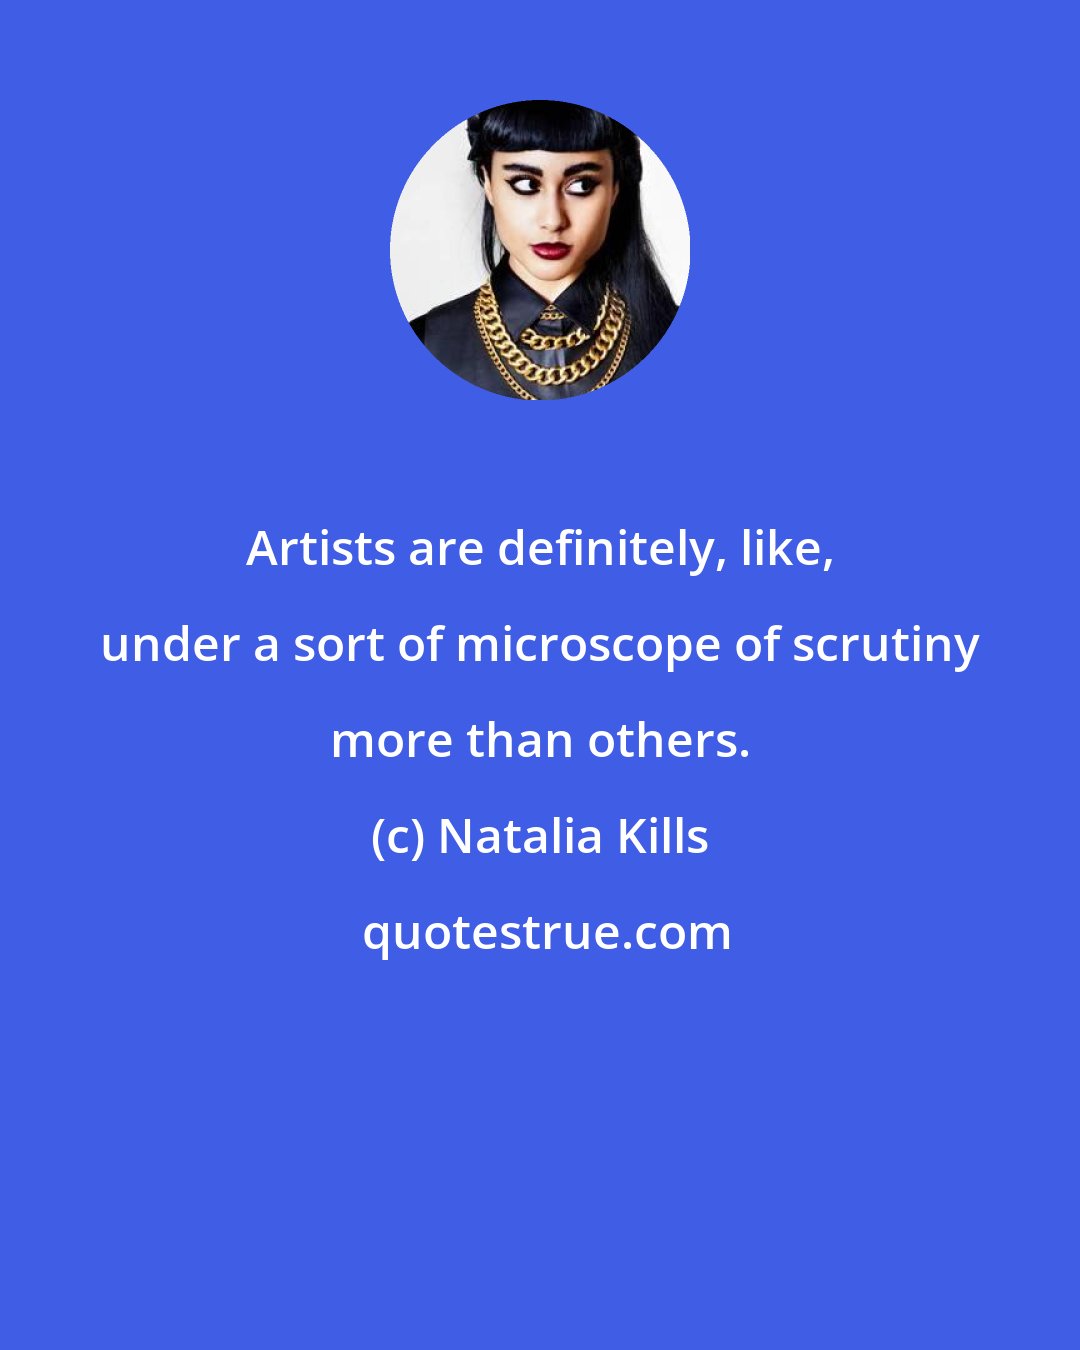 Natalia Kills: Artists are definitely, like, under a sort of microscope of scrutiny more than others.